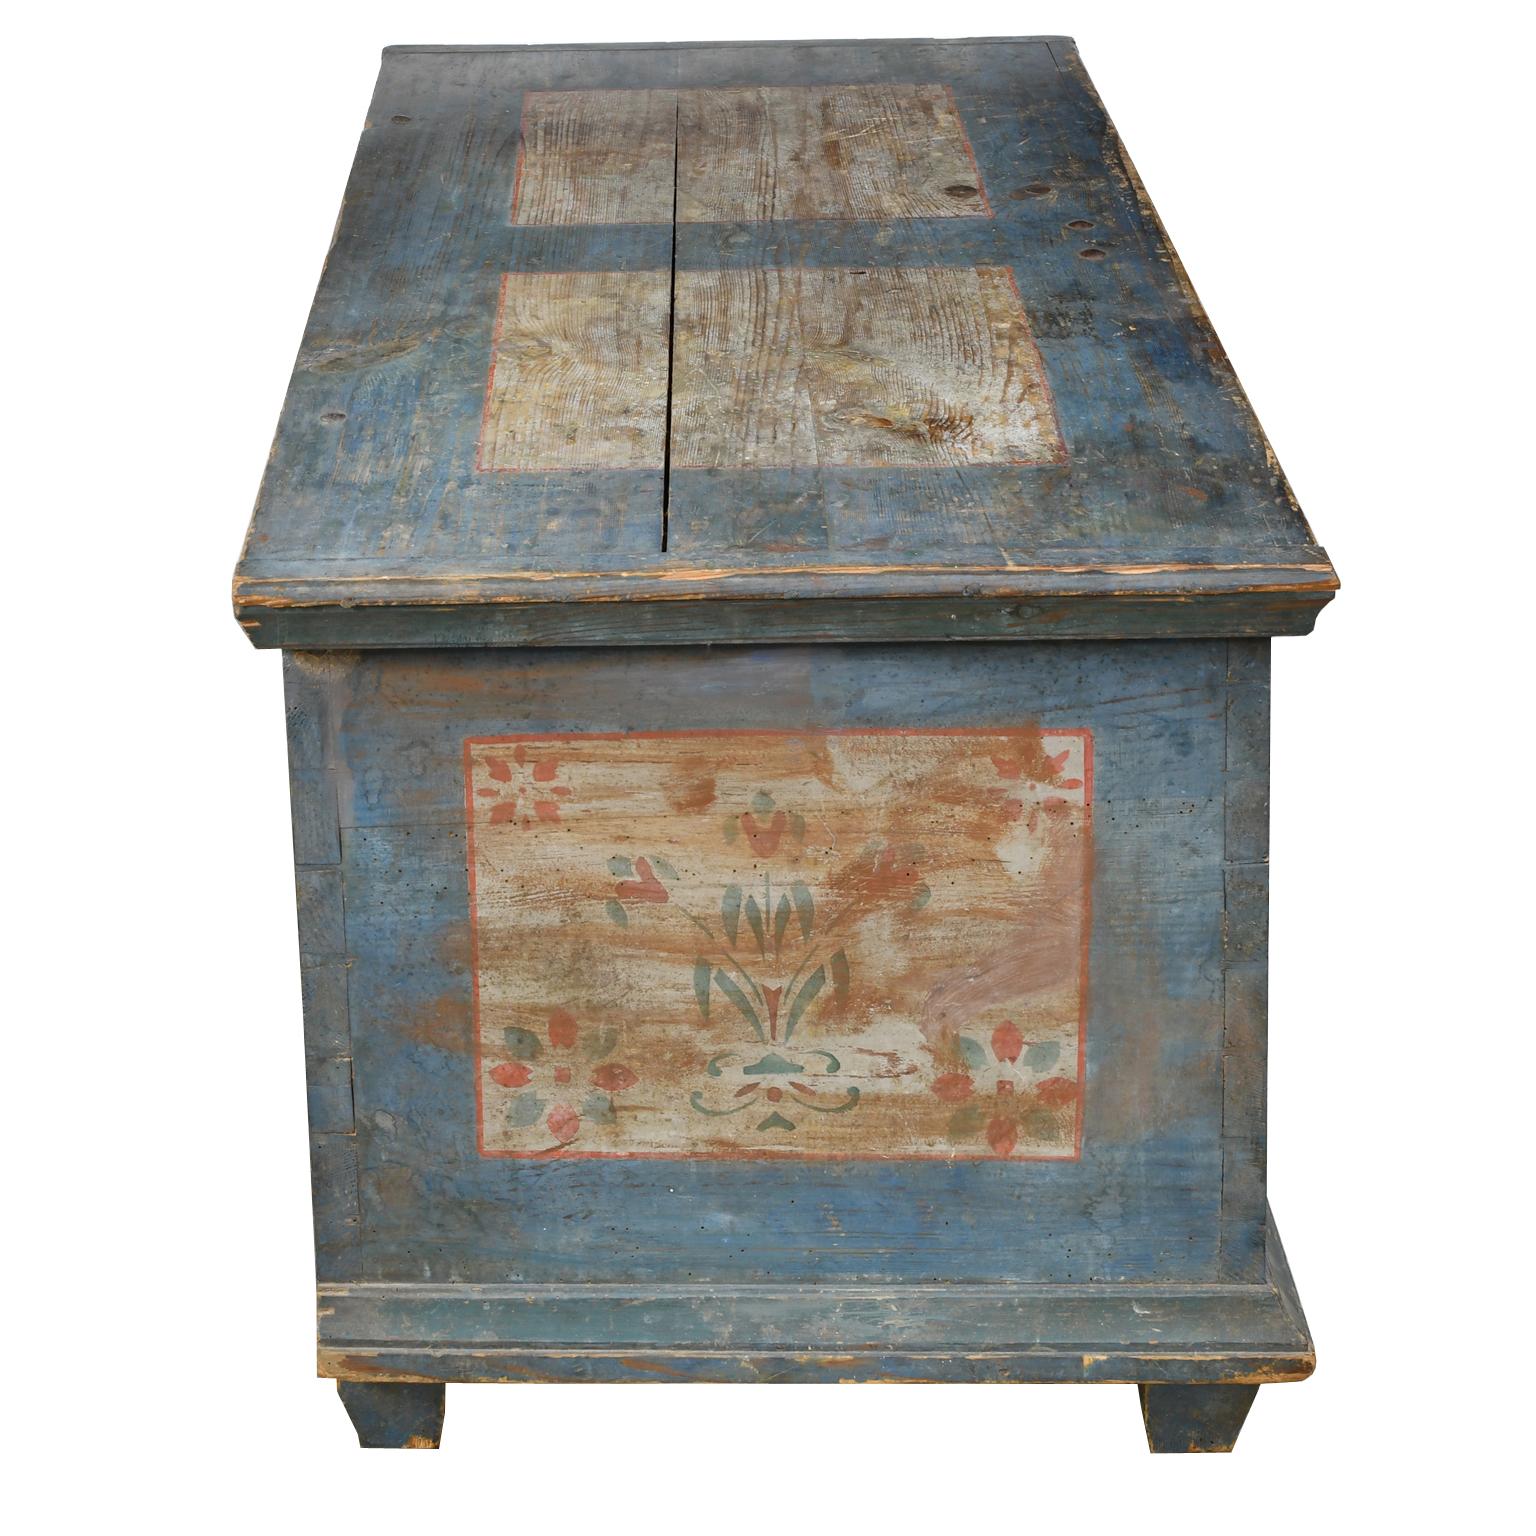 Pine Dowry Chest with Original Blue Paint & Floral Design, Northern Europe circa 1780